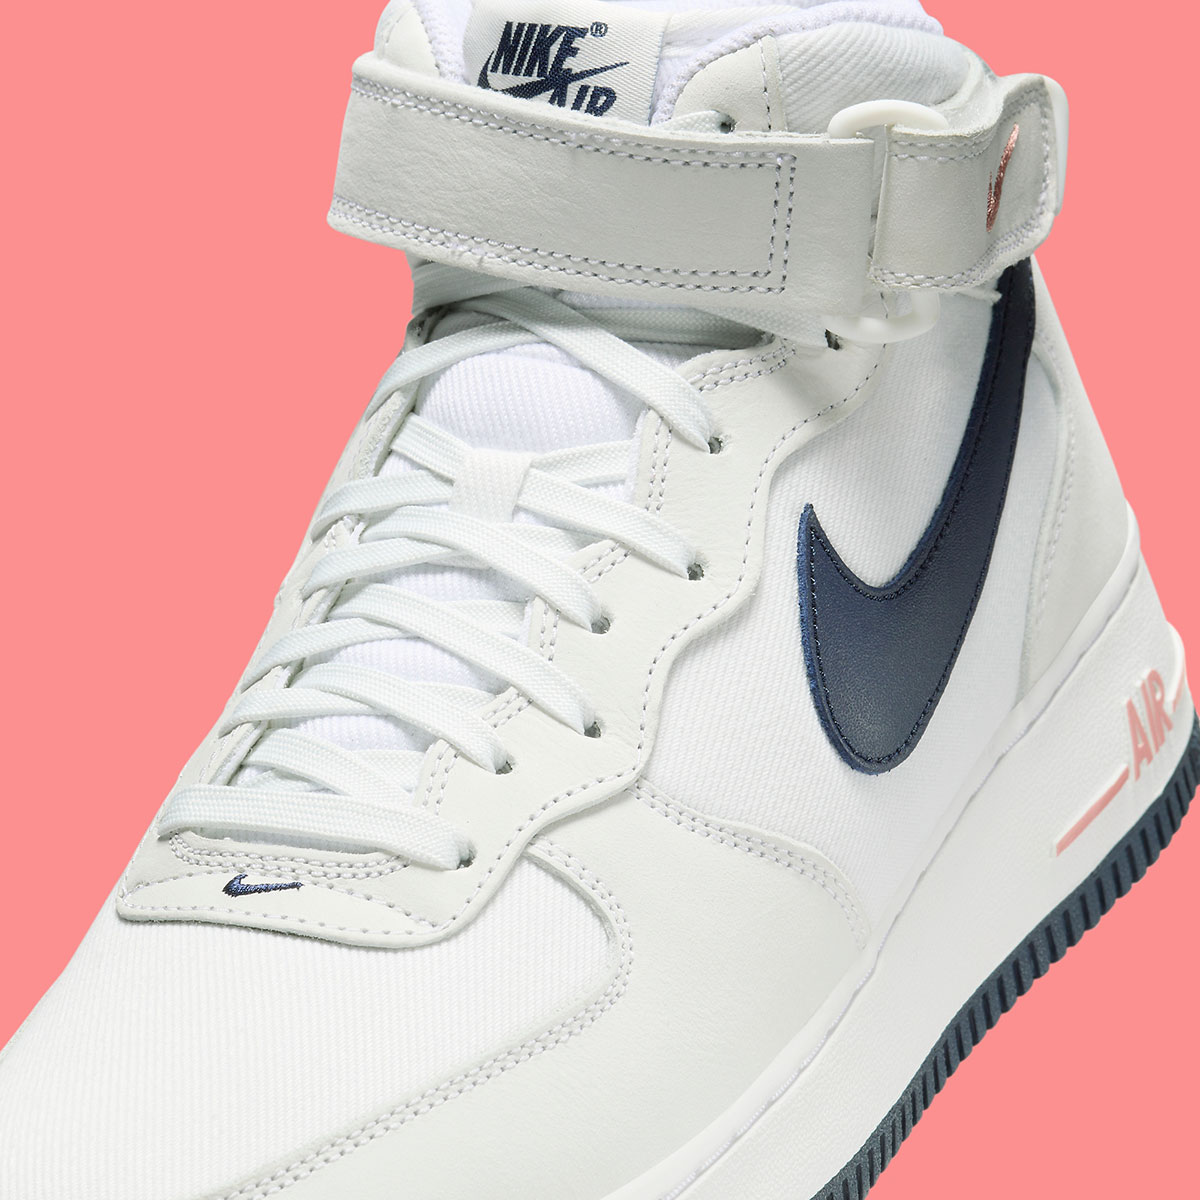 Nike Air Force 1 Mid Summit White Obsidian Pink Fb8879 100 9